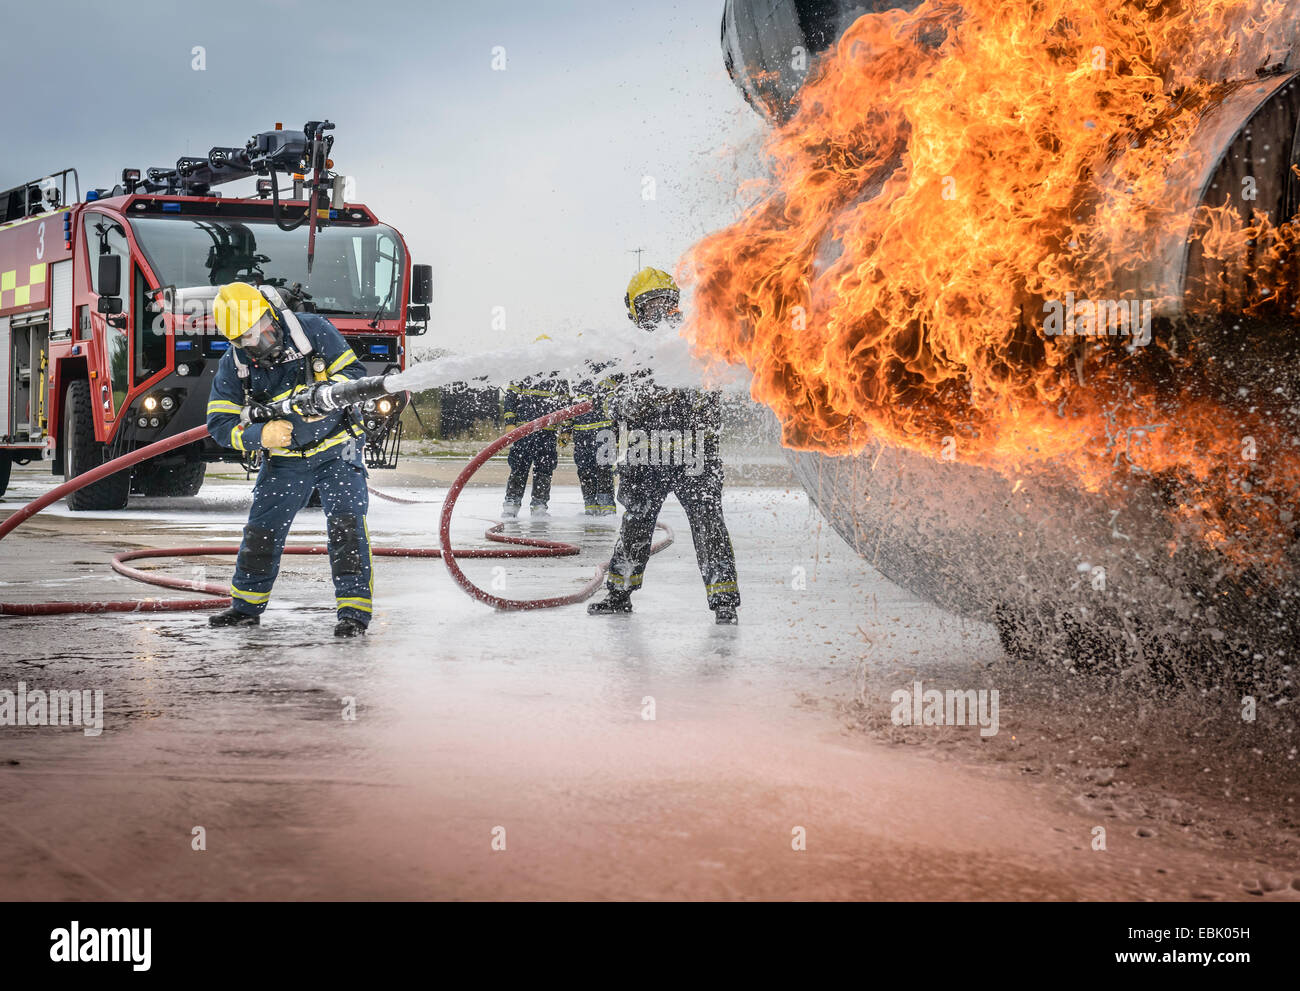 Firemen spraying water on simulated aircraft fire at training facility Stock Photo